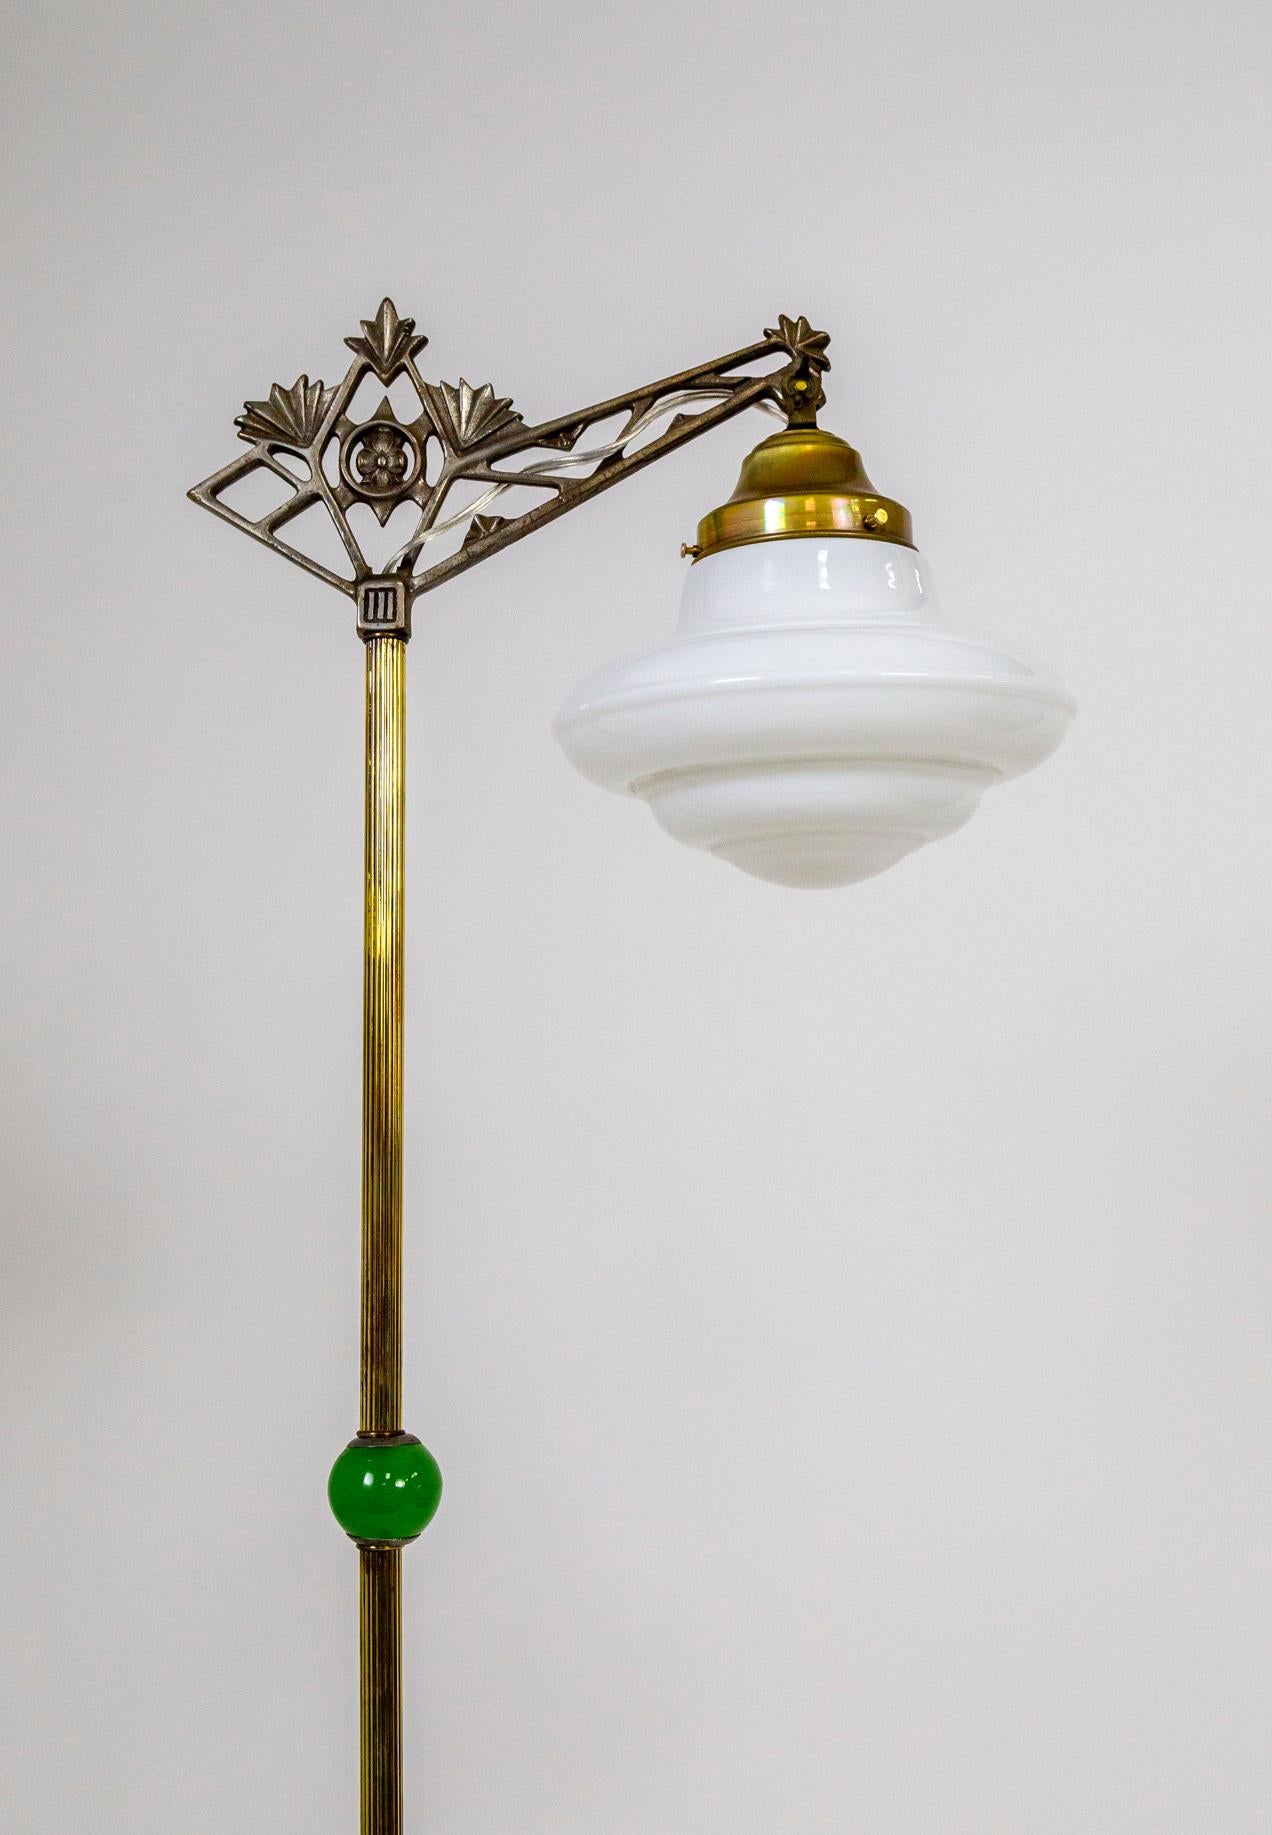 An early 20th century floor lamp with a reeded, brass stem and ornate, geometric crown/bridge that holds a rounded, tiered, milk glass shade. With jade green glass accented in the middle of the stem and stacked on the beautifully patinated, cast